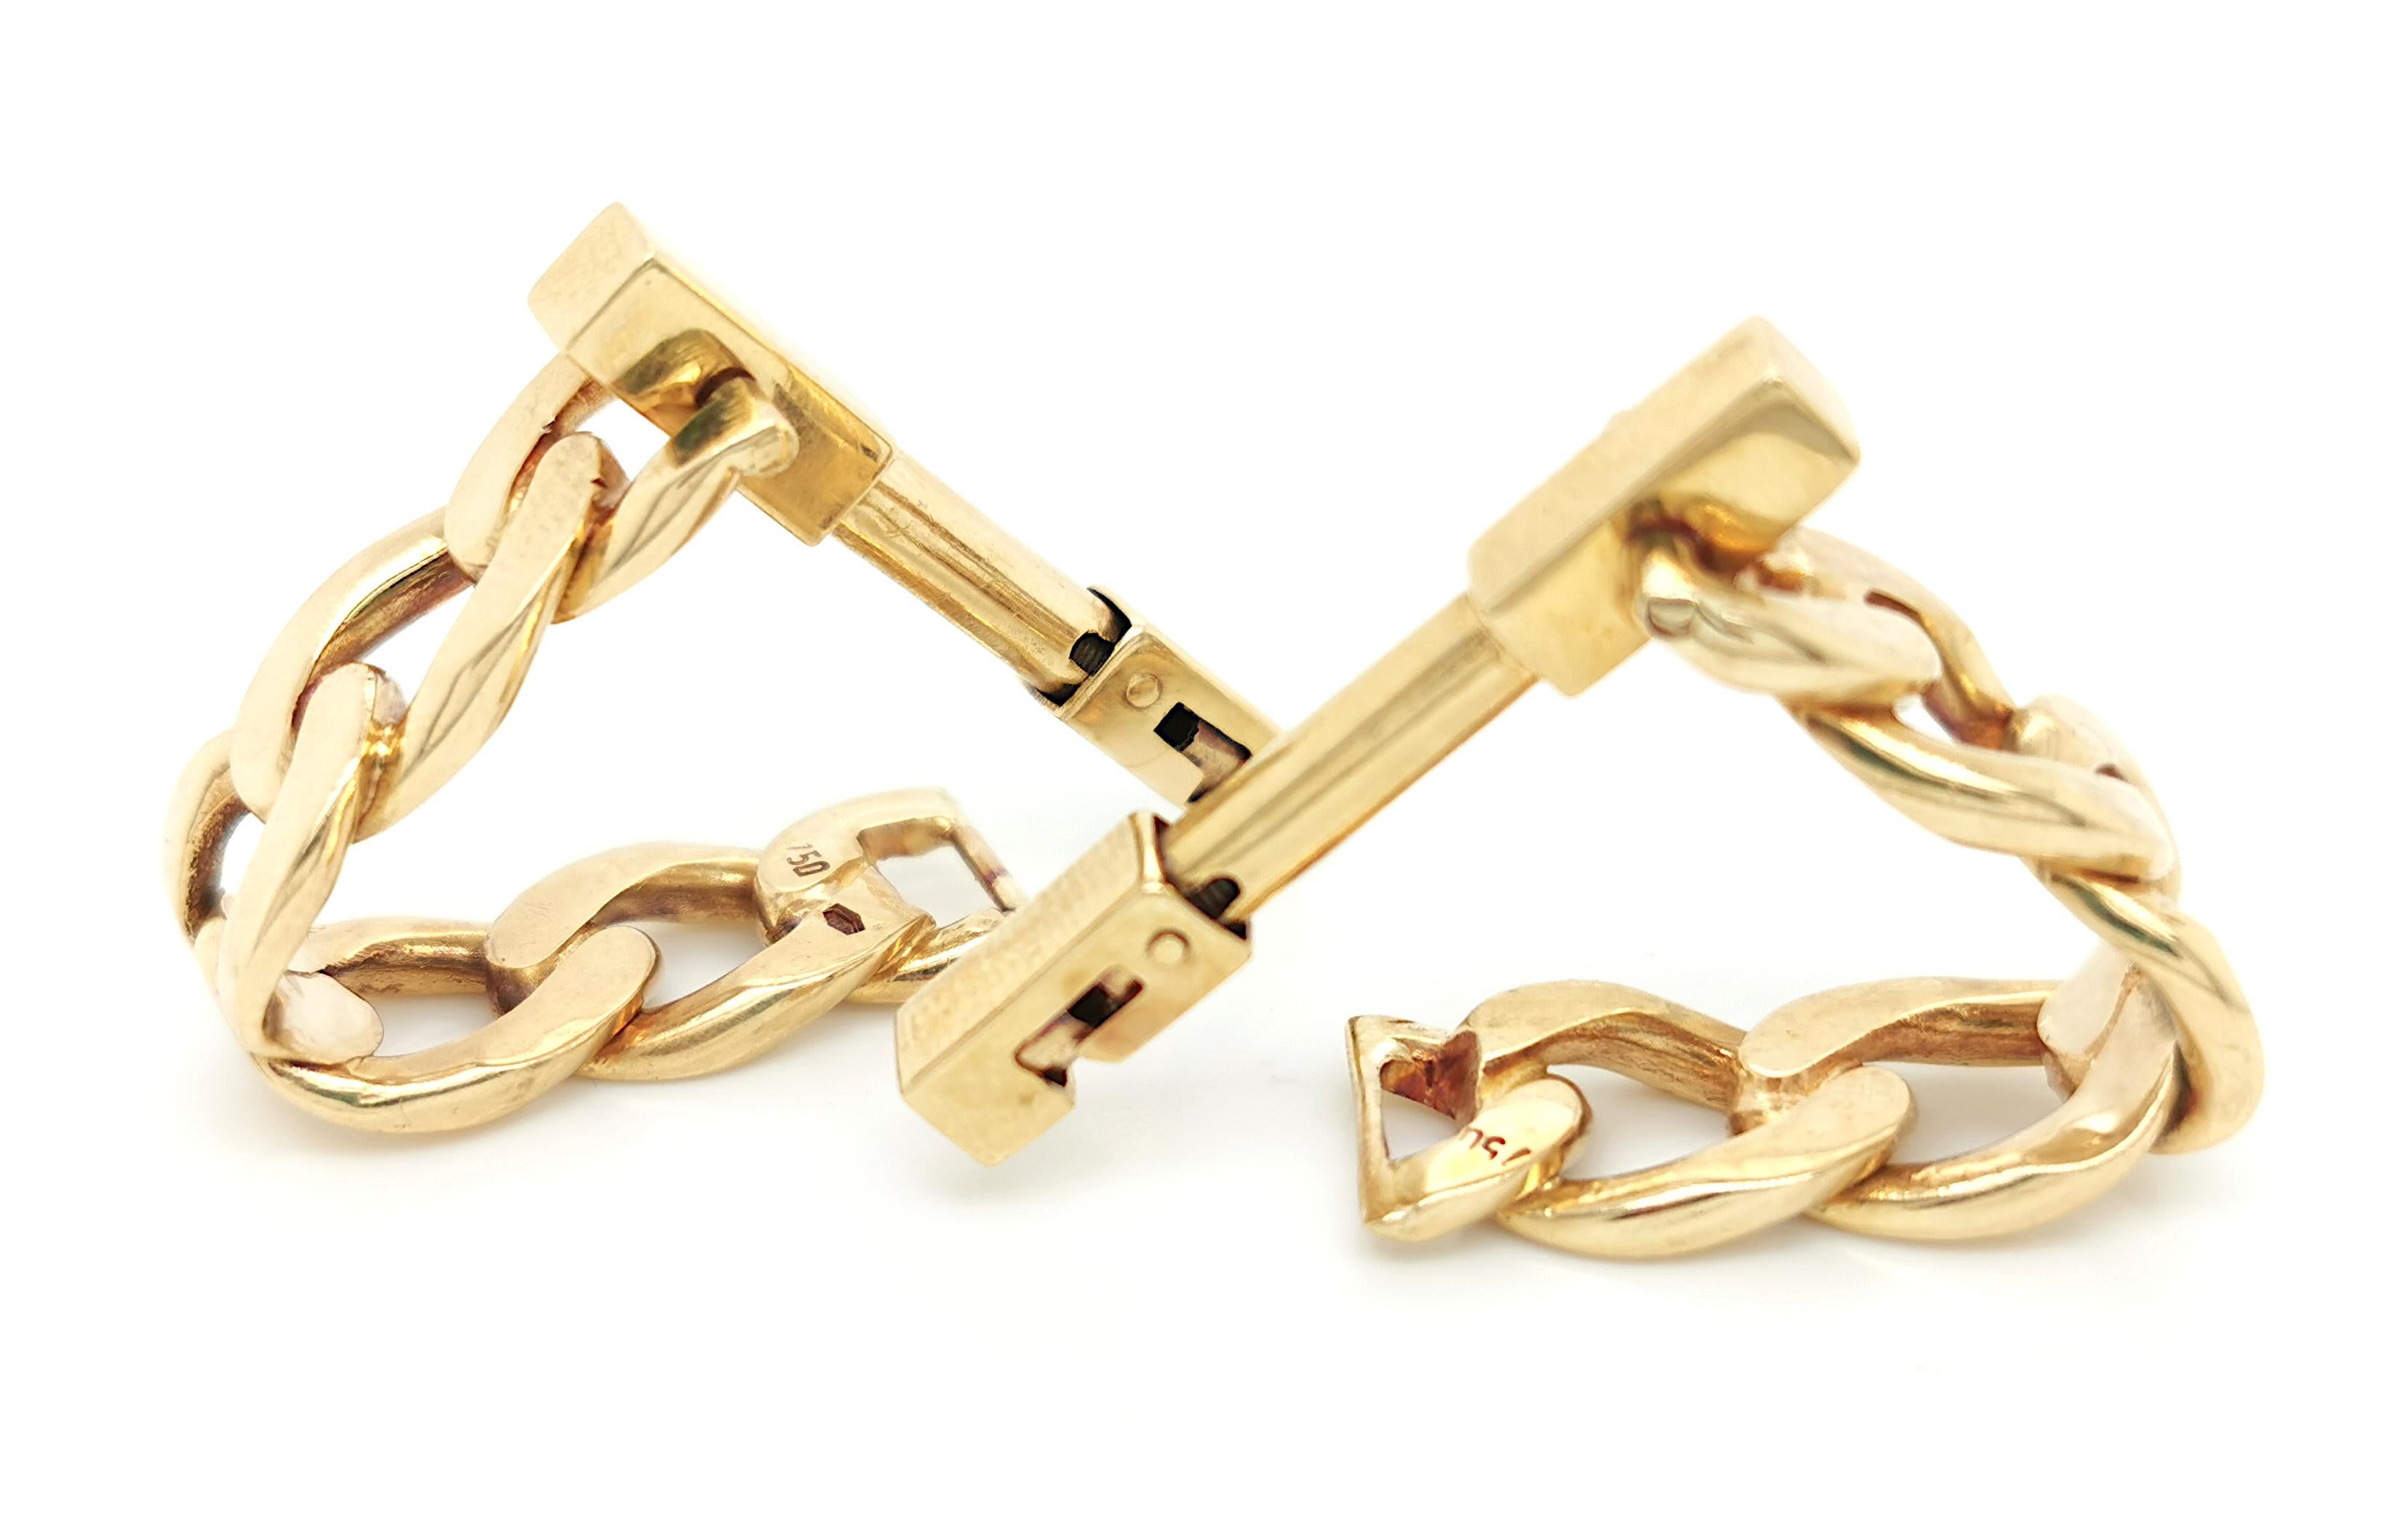 A pair of gold, flattened curb chain, stirrup cufflinks, mounted in 18ct gold, with sprung fittings, made in Italy with 750 and 1216AL Italian marks for Barbieri Fratelli, circa 1968.

Barbieri Fratelli, founded by Walter Barbieri, in 1963, is a